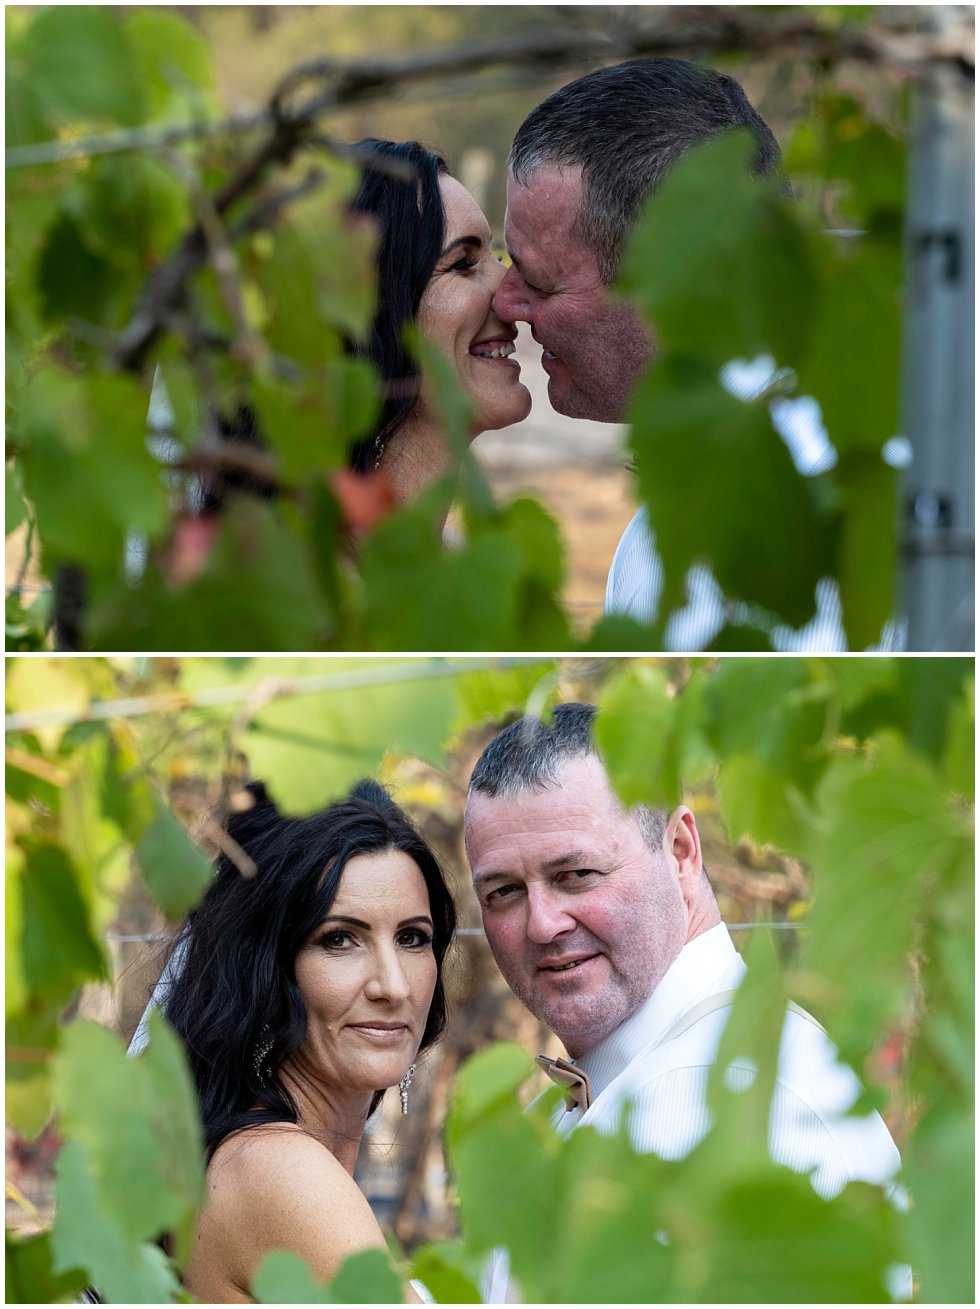 ArtyJ Photography | Spring Elopement, Pokolbin, Country Elopement Packages NSW, NSW, Hunter Valley Elopement, Hunter Valley, Elope Hunter Valley, Peppers Convent, Hunter Valley Wedding Photographer, Elope, Circa 1876, Elopement | Rebecca & Denis | Elopement